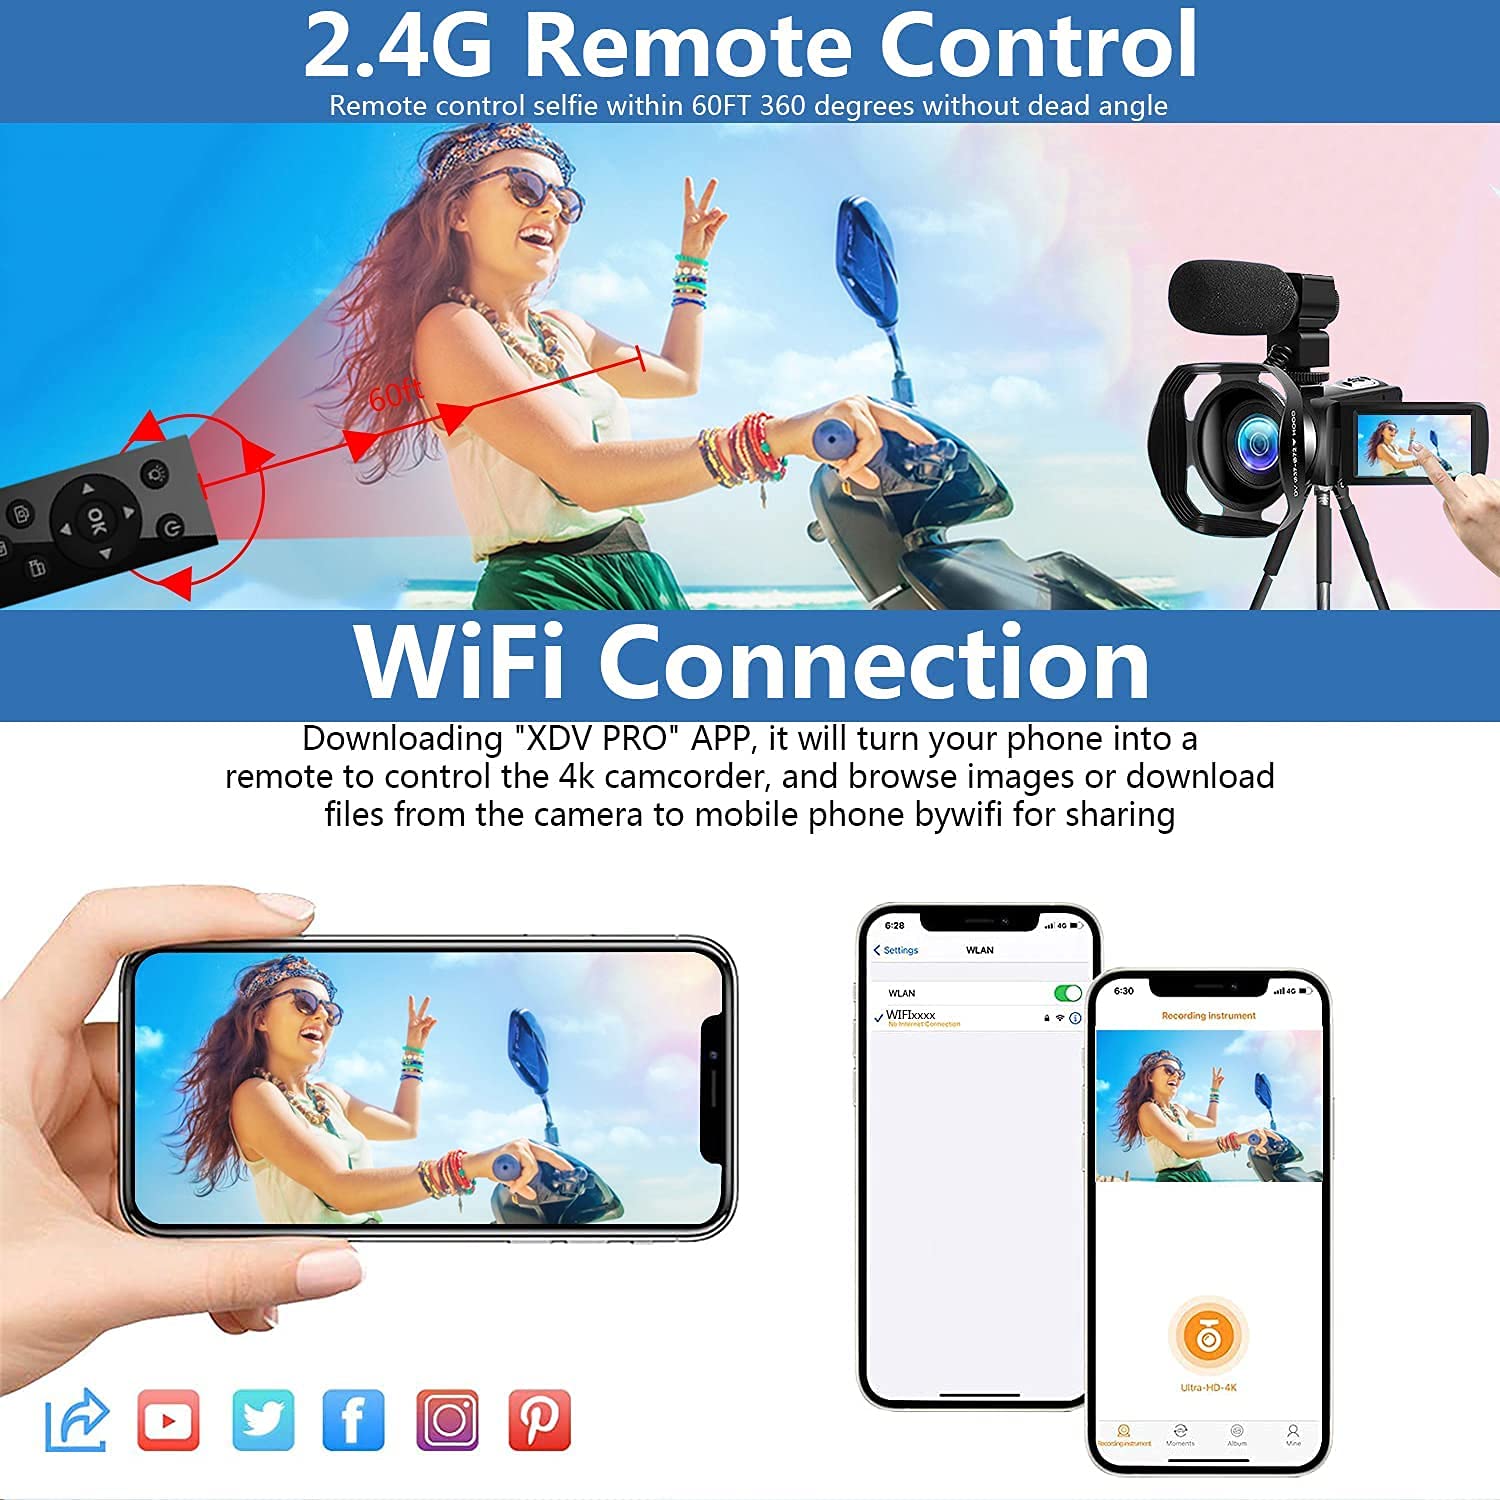 Video Camera UHD 4K 48MP for YouTube 18 X Digital Camcorder IR Night Vision Wi-Fi Vlogging Camera With Microphone 2.4G Remote 3 in Touch Screen Handheld Stabilizer